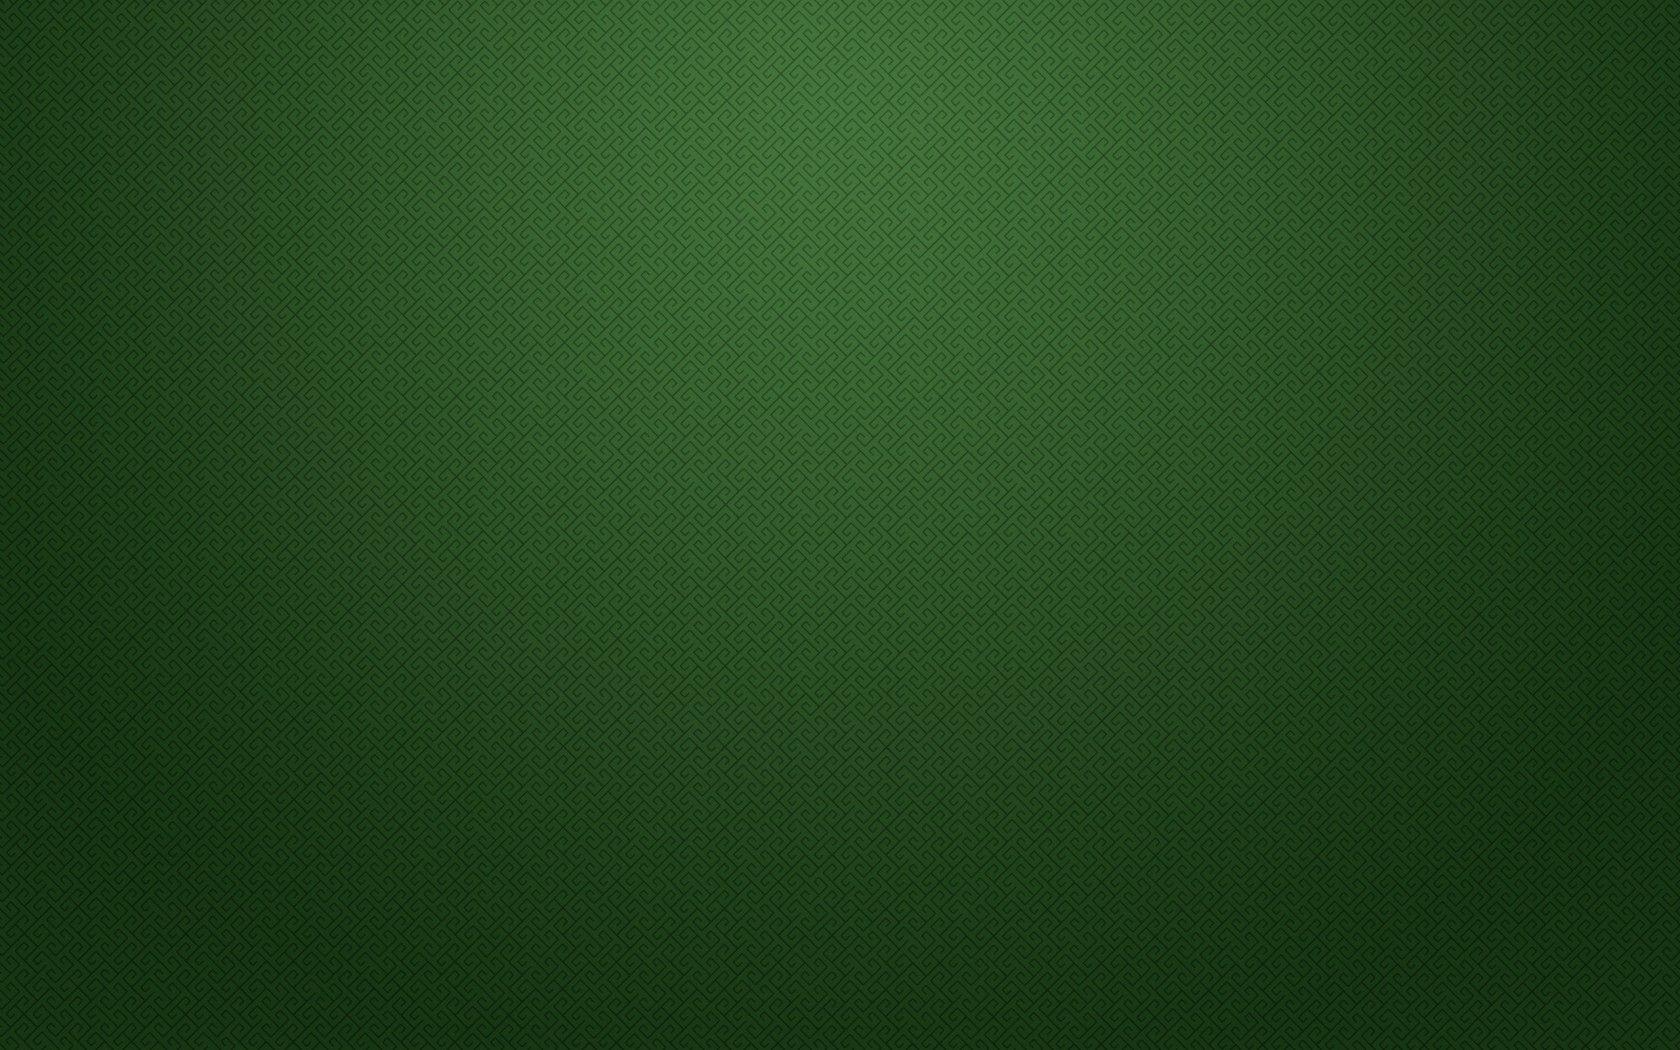 Solid Green Background HD Wallpaper, Background Image